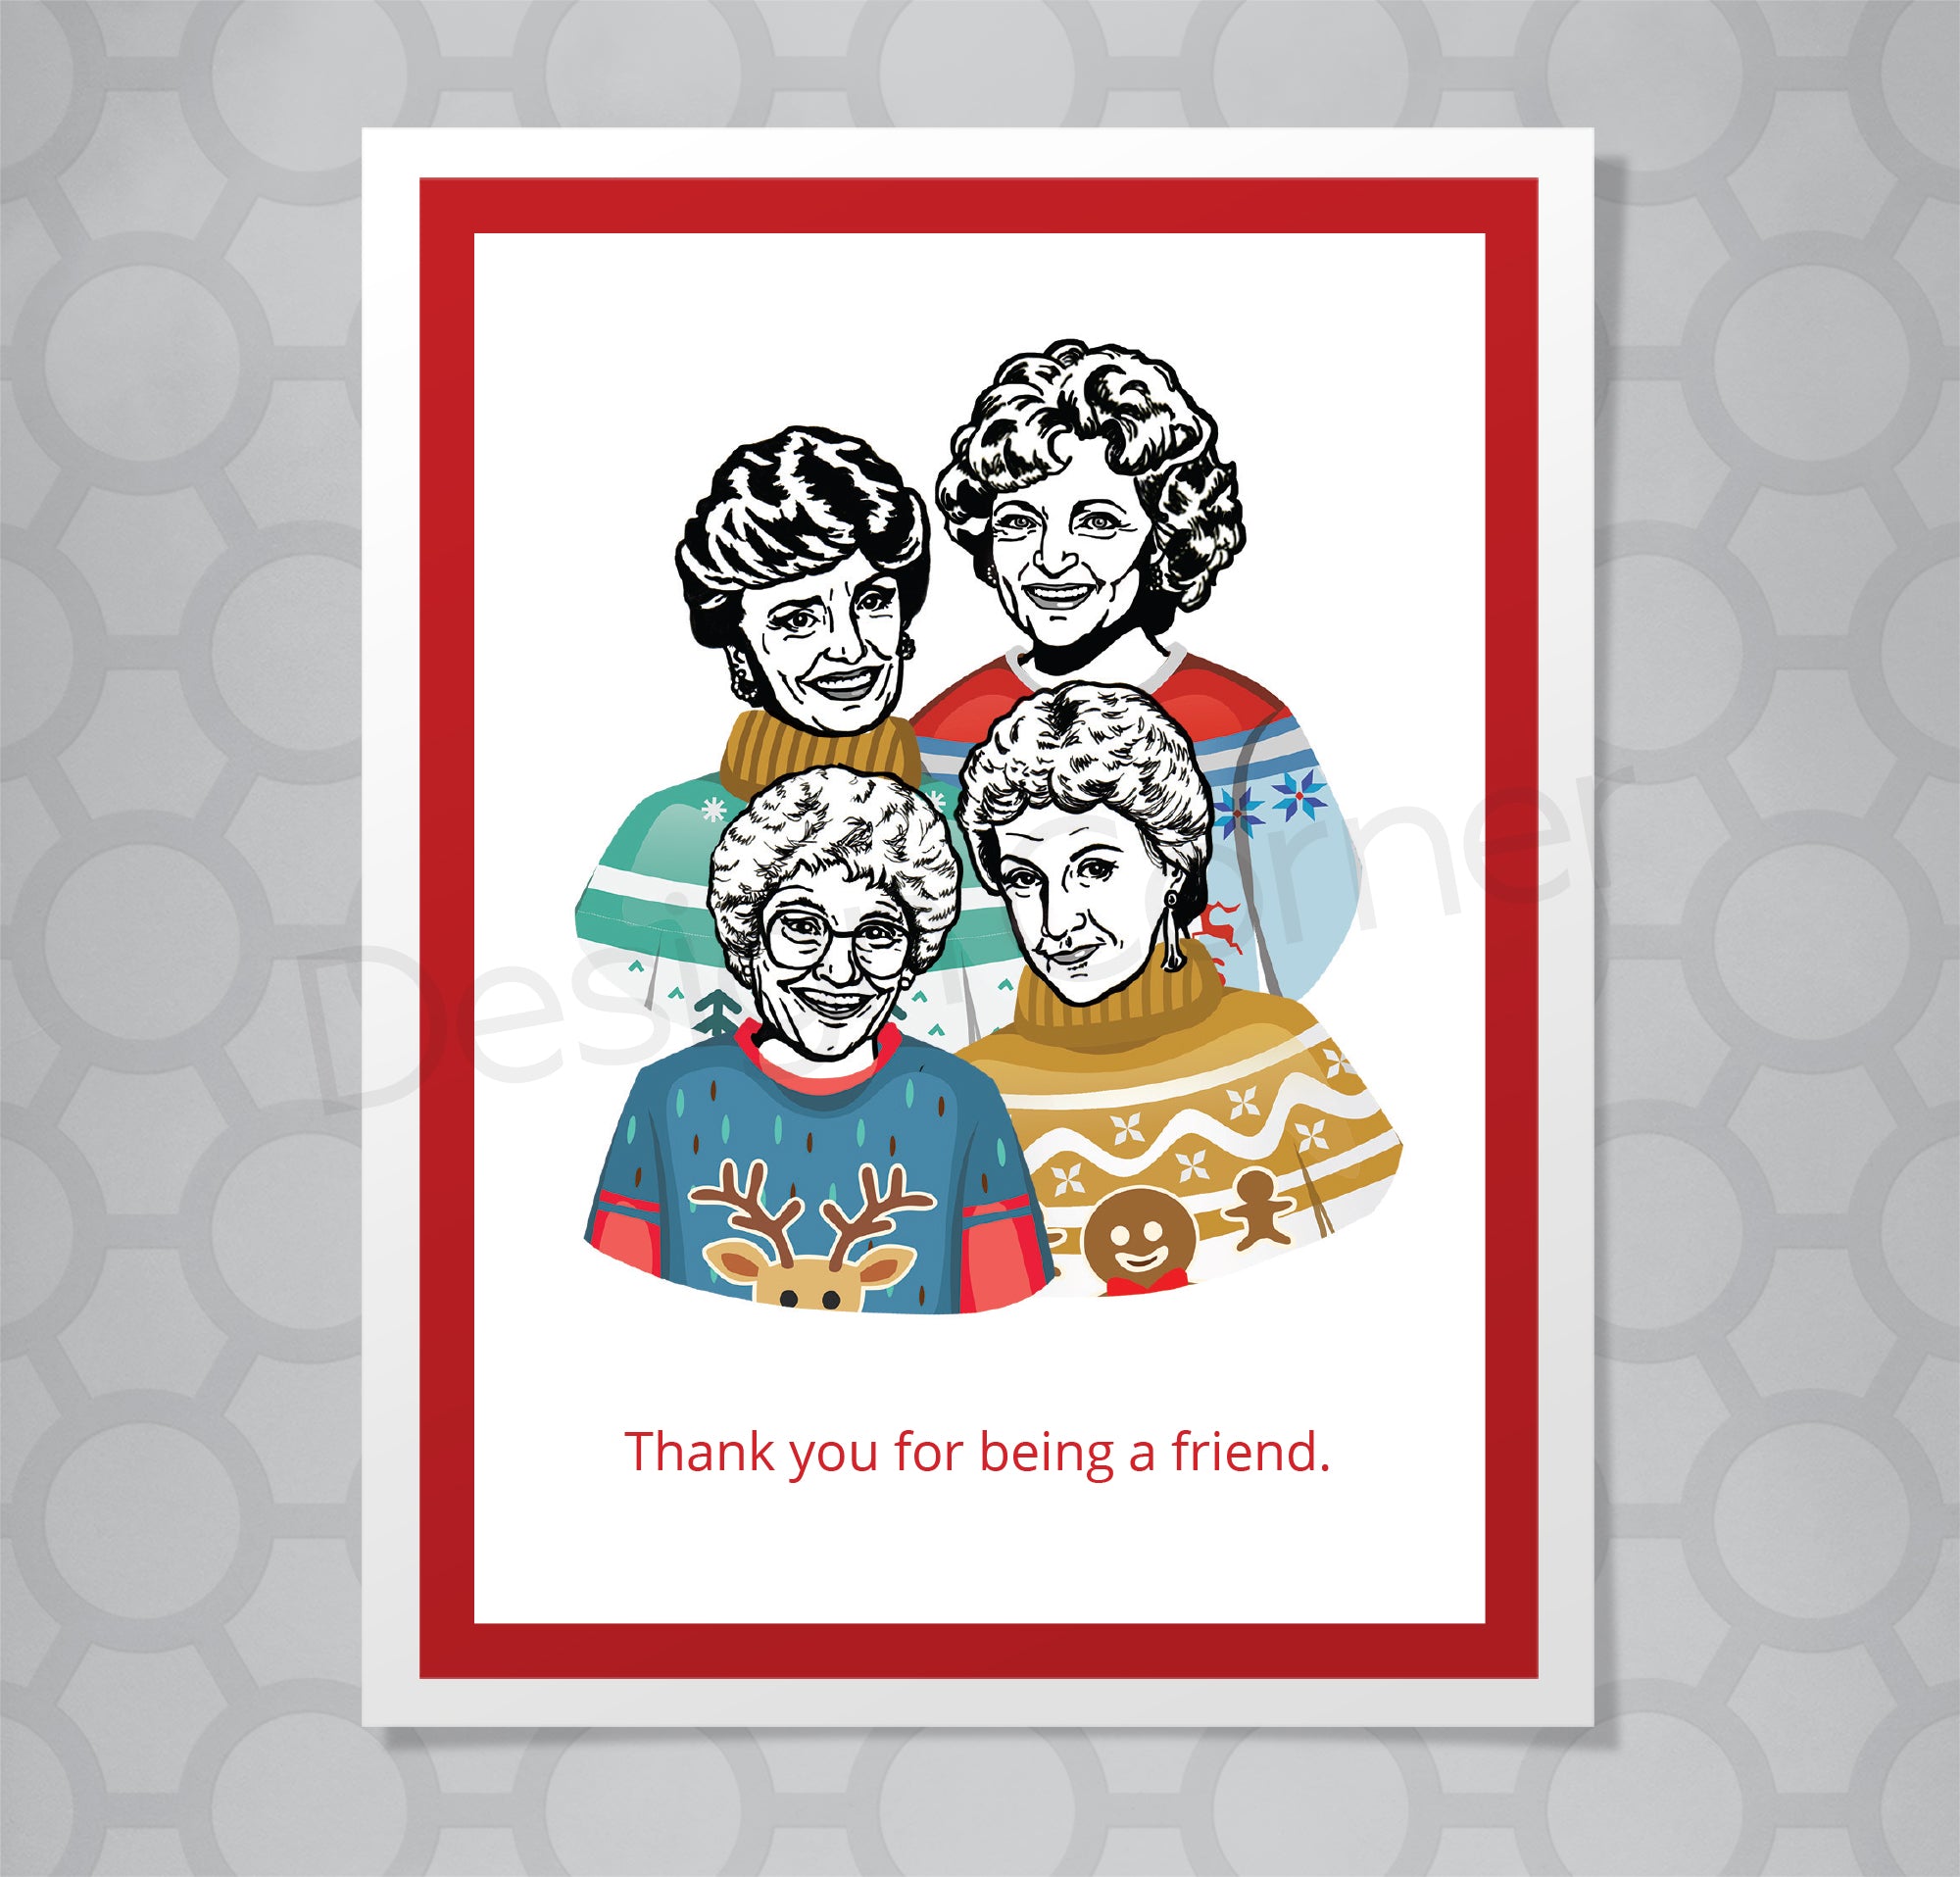 Illustration of all 4 golden girls with Christmas sweaters on front of Christmas card with caption "Thank you for being a friend."